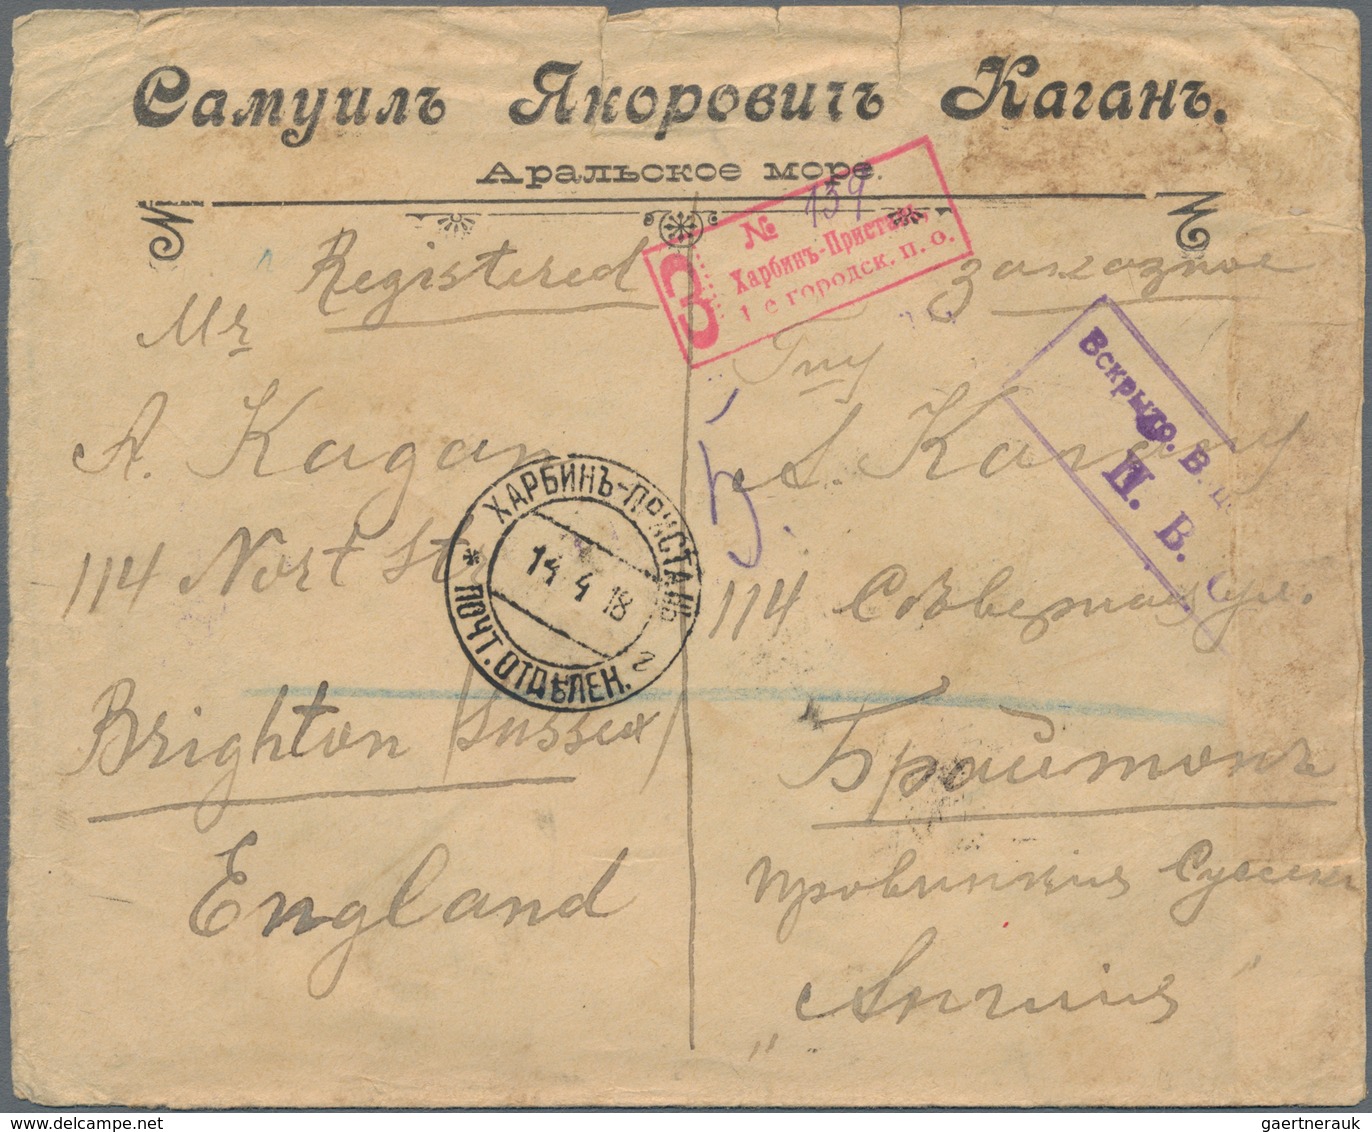 Russische Post In China: Manchuria, 1918, 15 K.(3 Inc. Pair) And 20 K. Imperf. (vertical-strip-3 W. - China